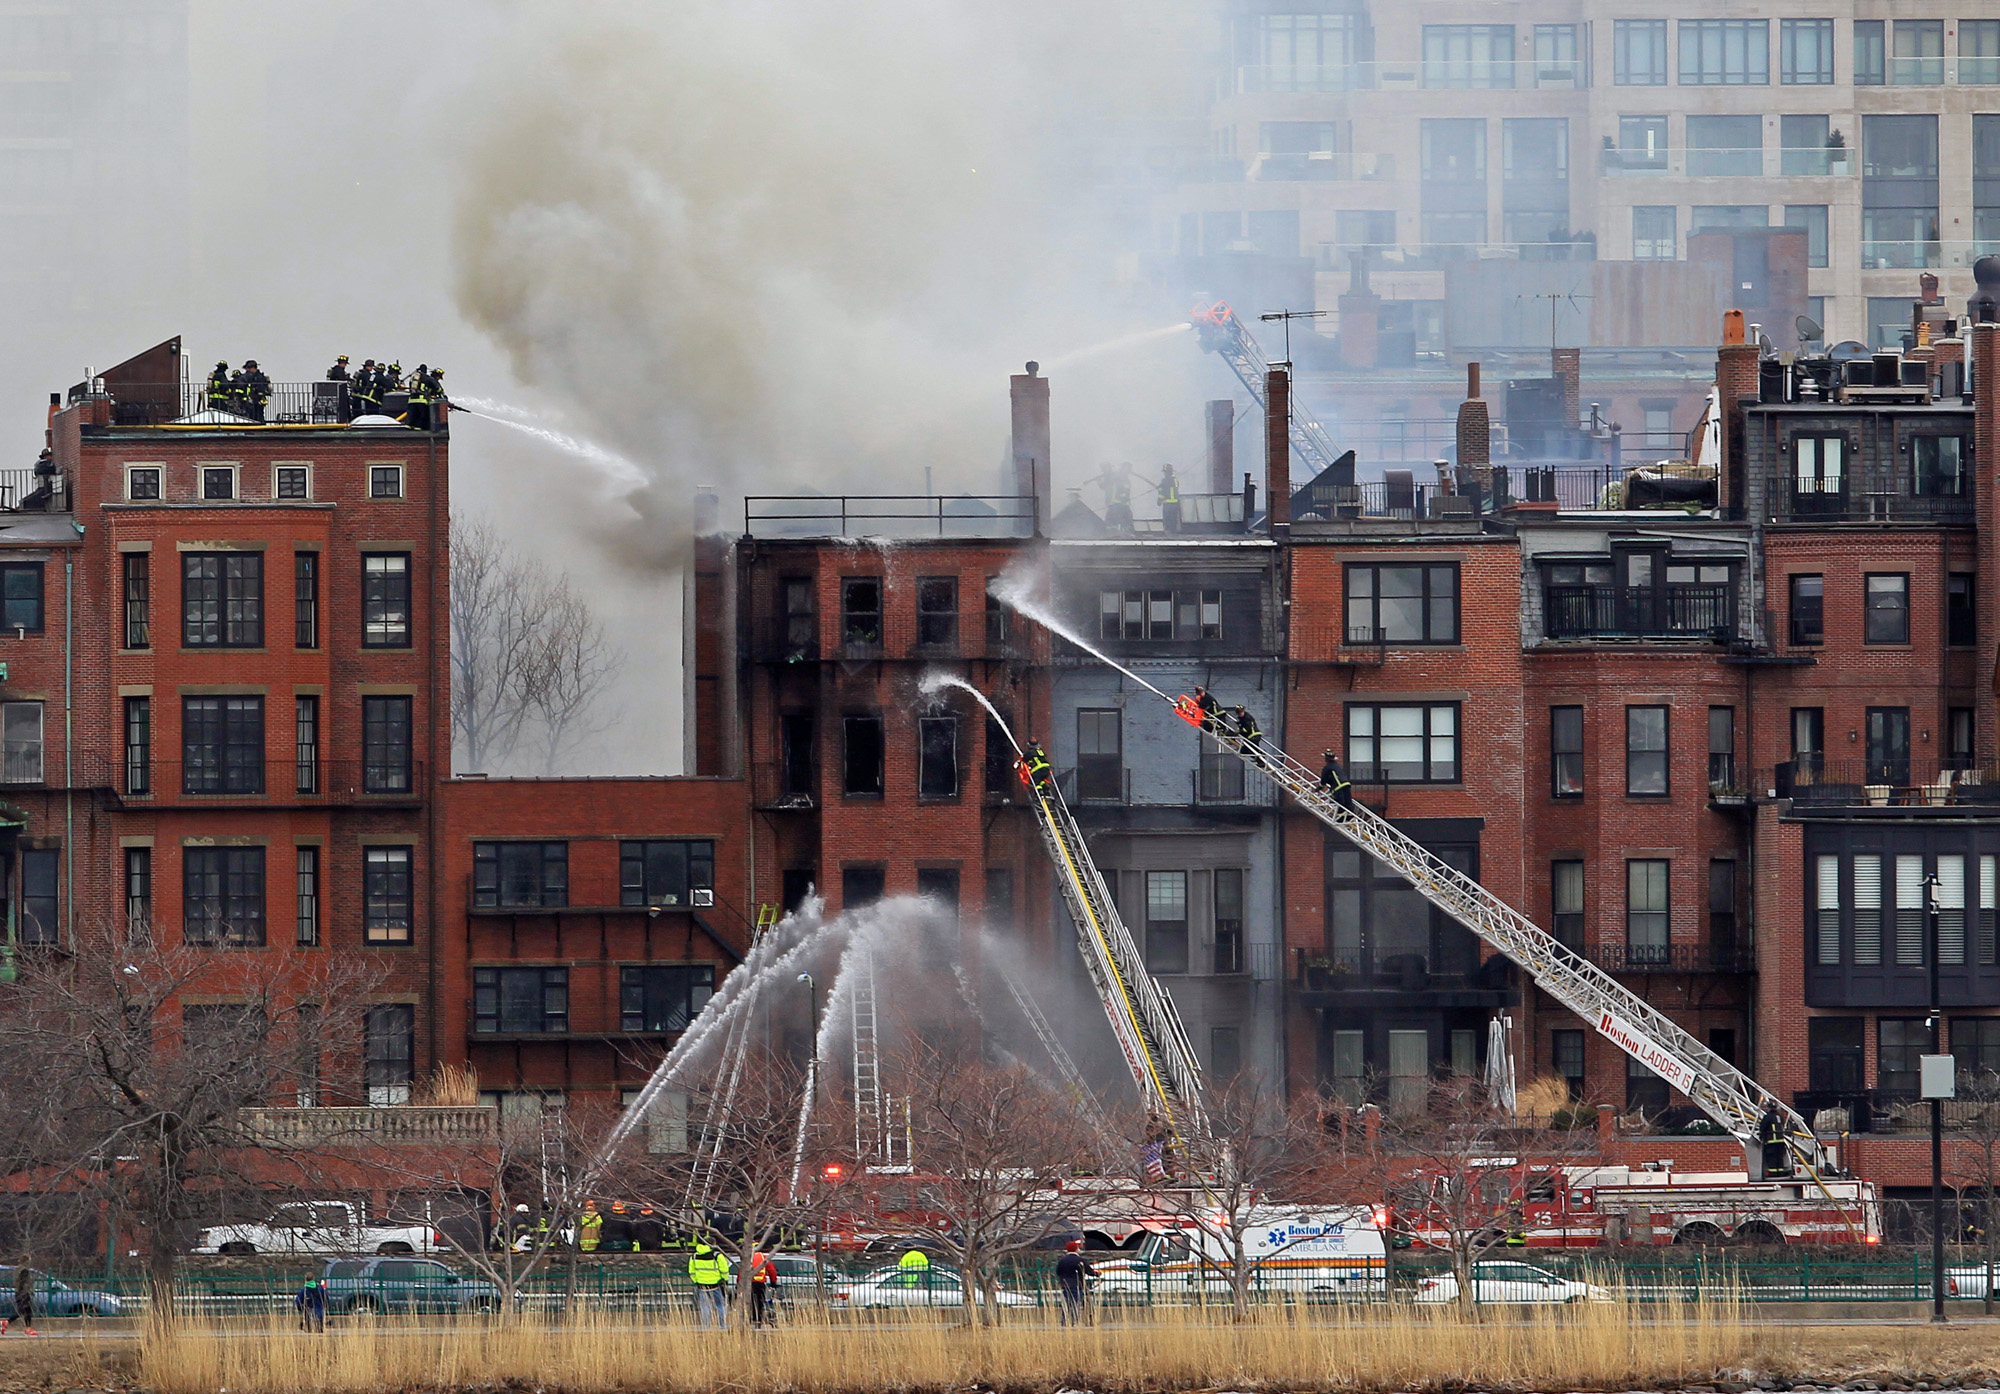 Fire crews can be seen in a massive response to the fatal 9-alarm fire on Beacon Street in Boston, as seen in this photo taken from Cambridge on March 26, 2014. (Stuart Cahill/Boston Herald, File)